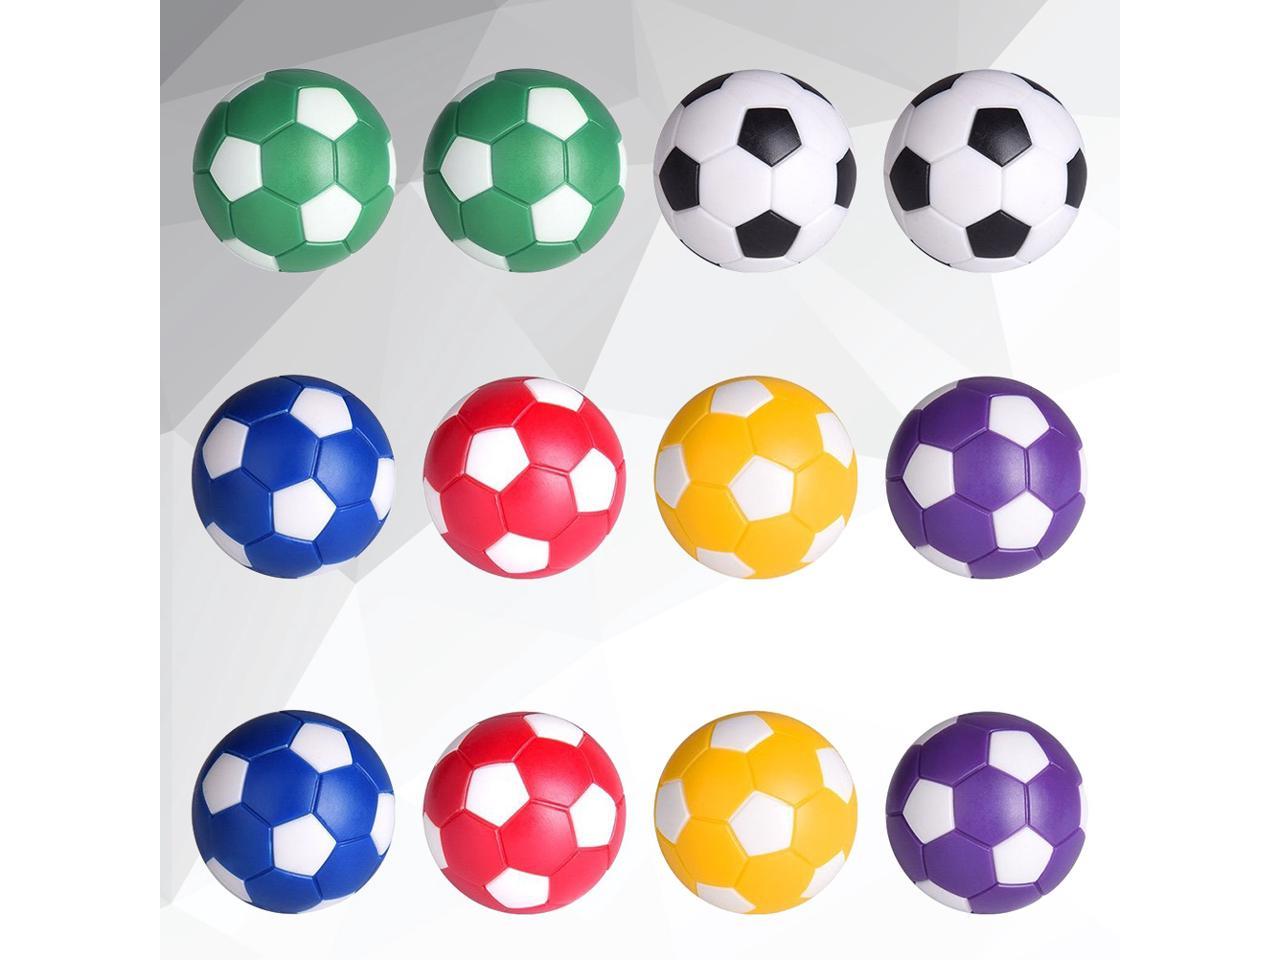 Universal Replacement Mini Foosball Soccer Ball Indoor Game Table Football 6pcs 